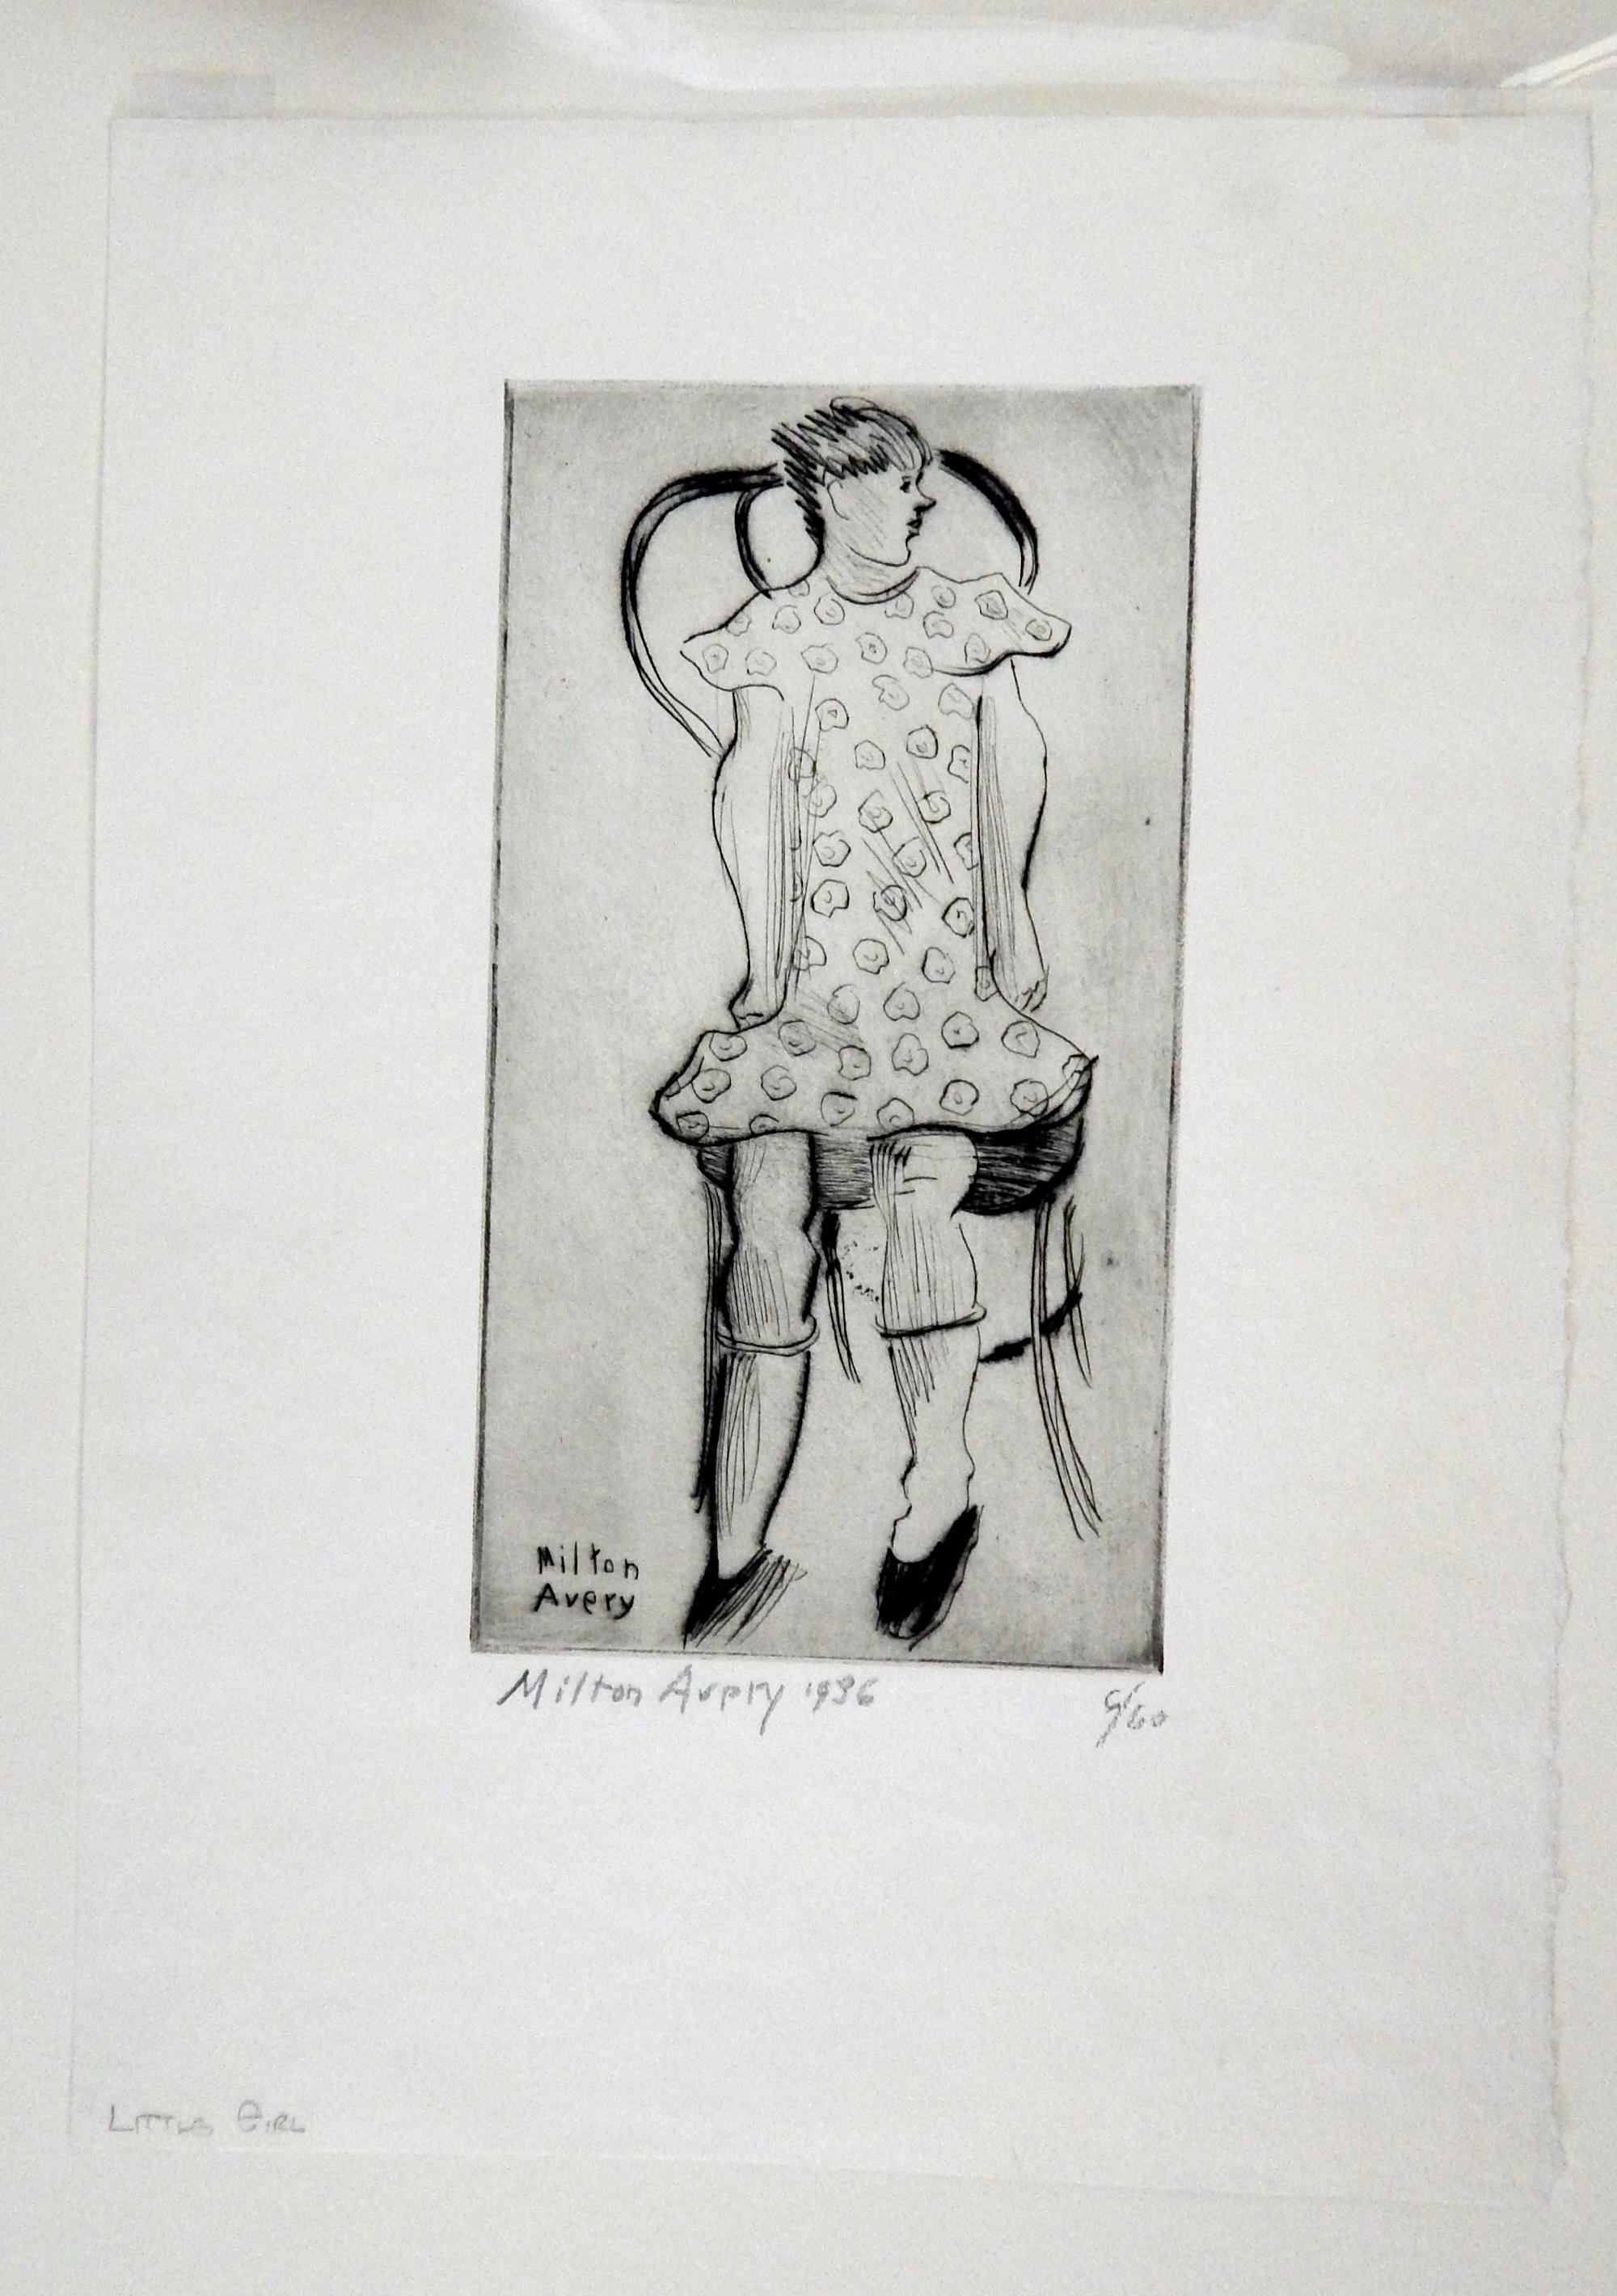 Original Etching by Modernist Milton Avery (1885-1965) 
Image measures: 8 5/8